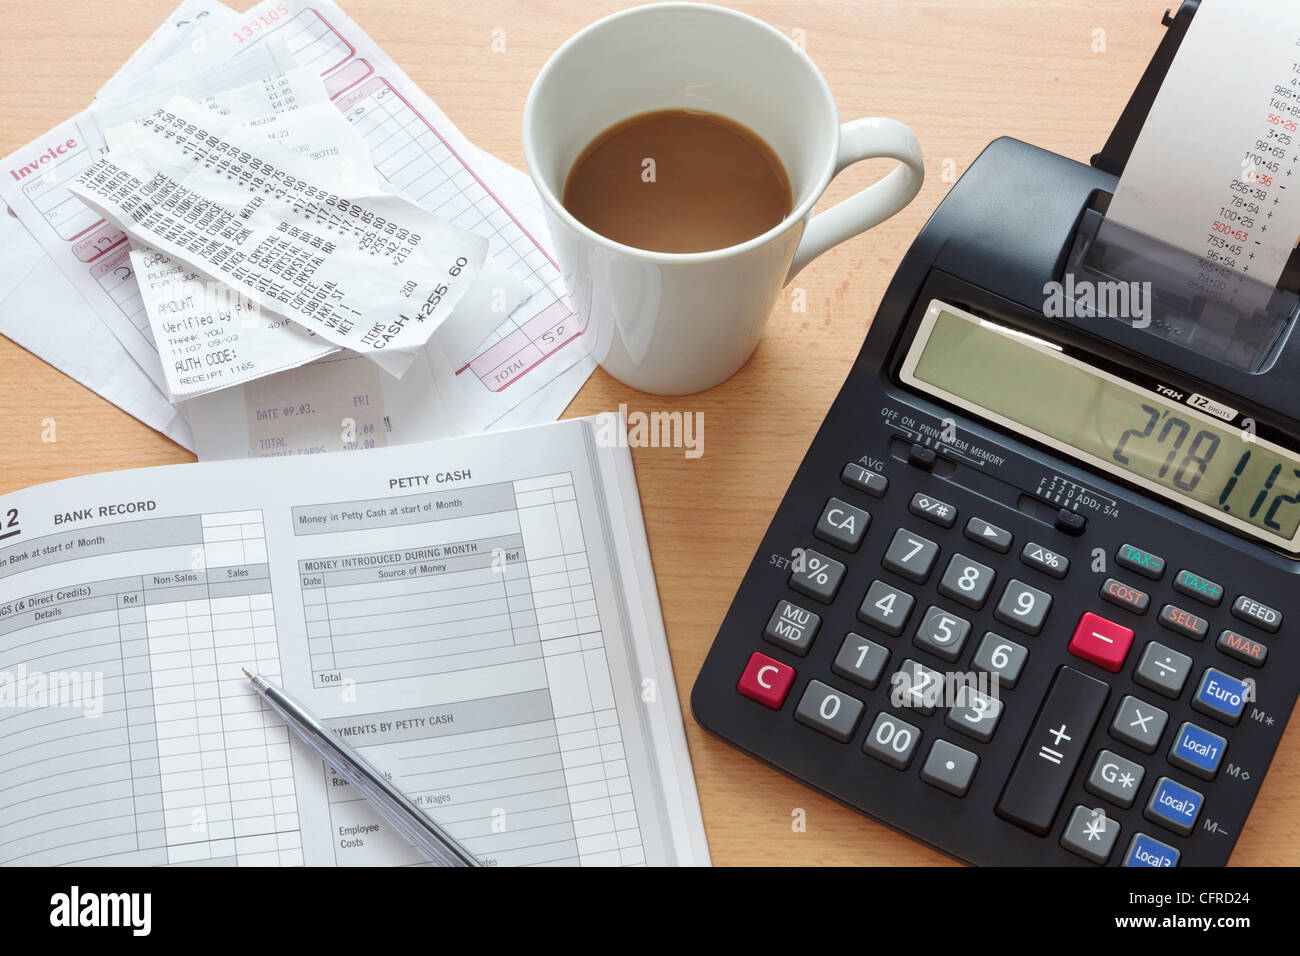 Still life bookkeeping photo of a sales ledger with a pile of receipts, invoices and a print calculator. Stock Photo